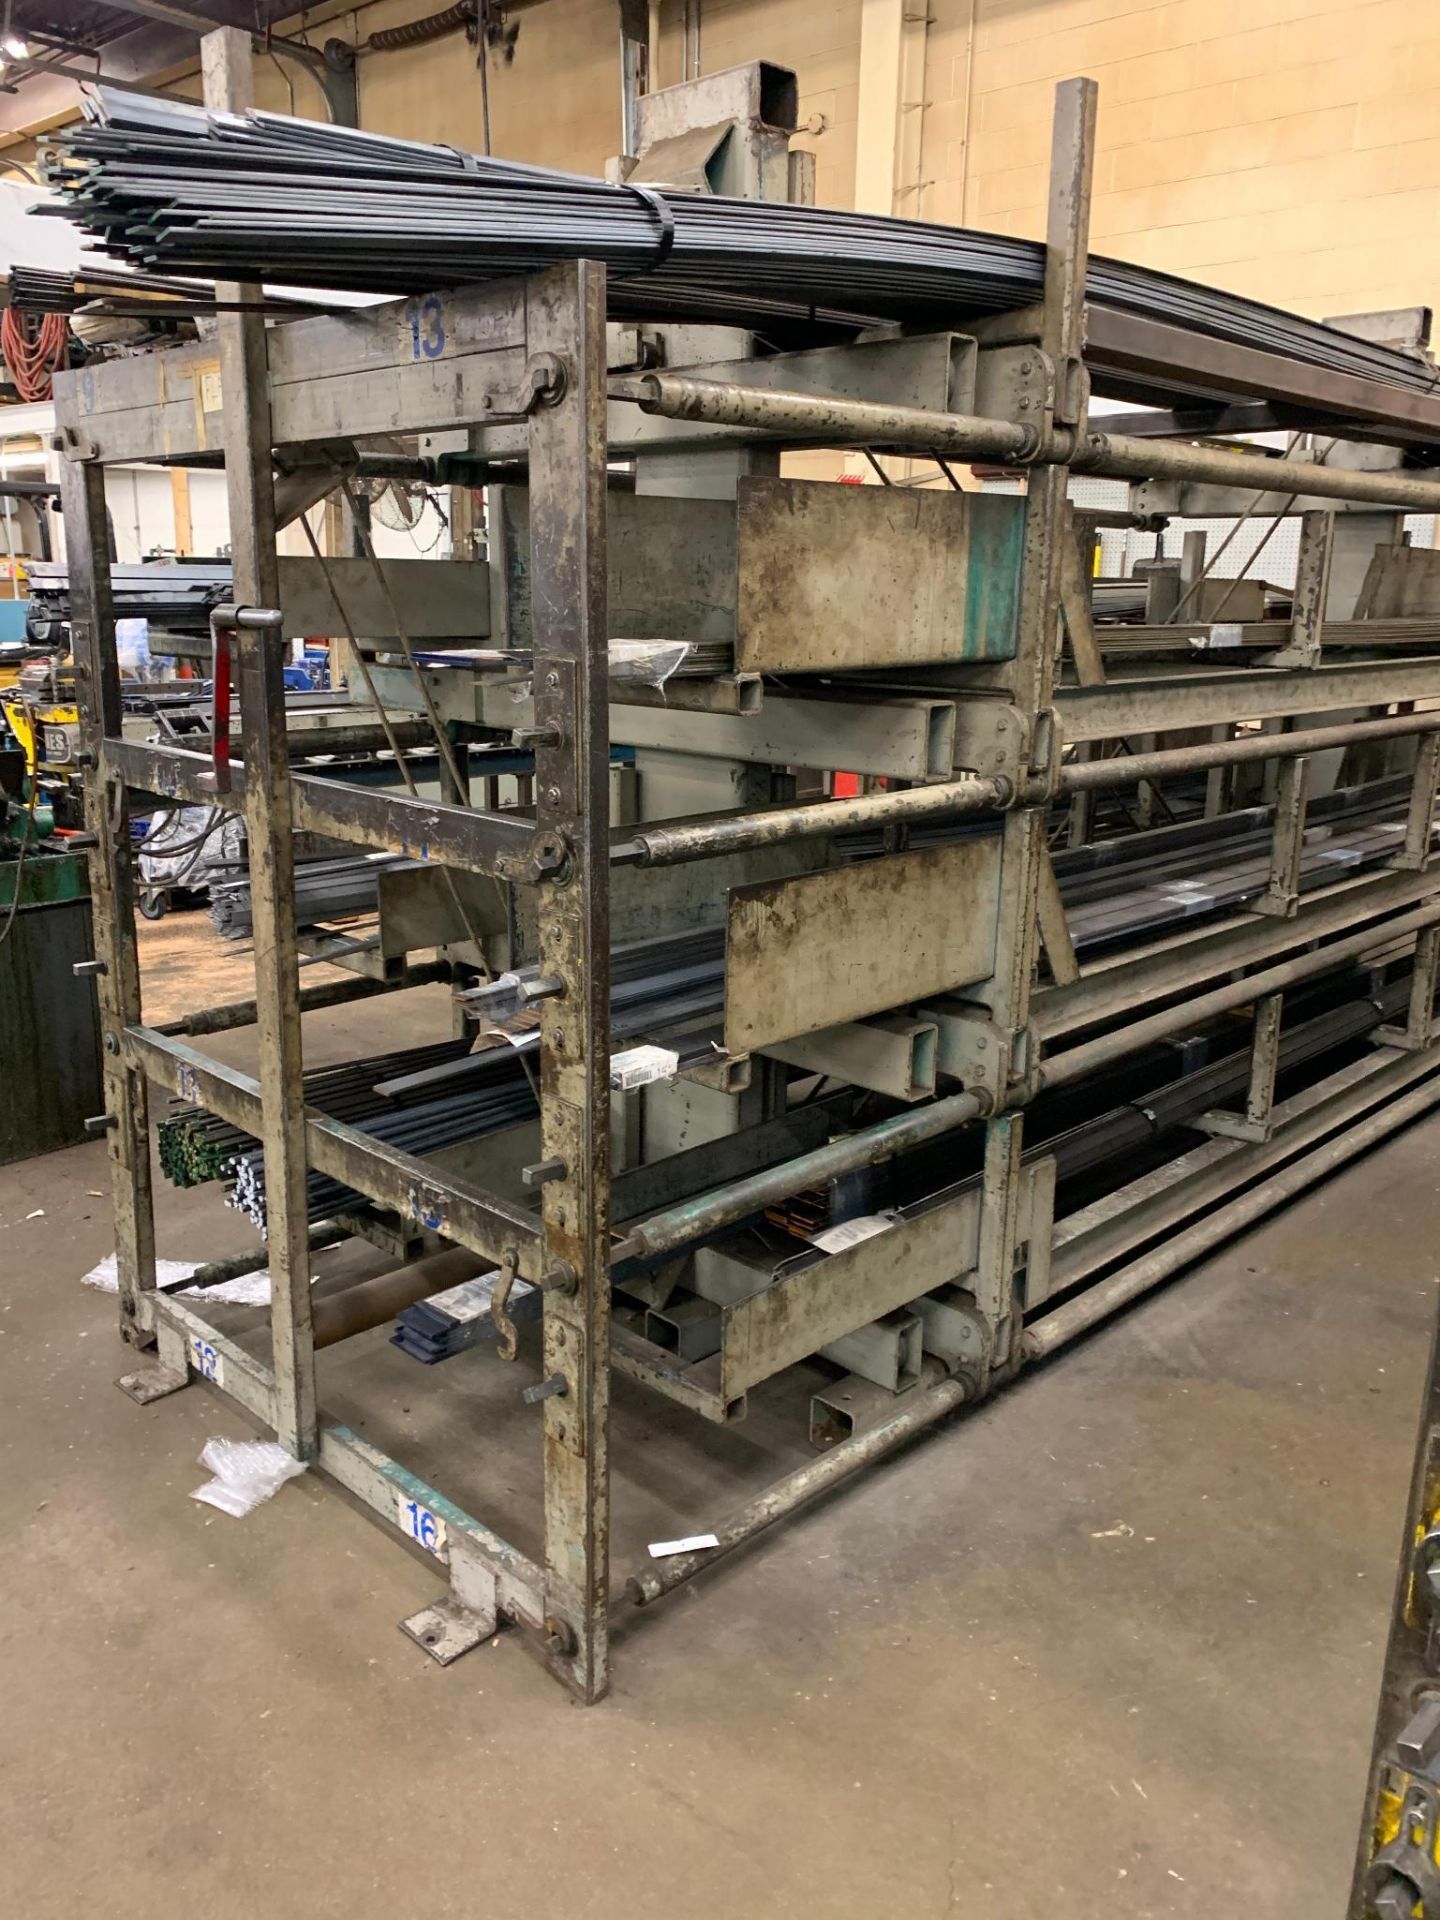 SSS Inc (Steel Storage Systems Inc) 4T-*2x20-2-20 Roll-Out Cantilever Rack Serial: 1660 - Image 6 of 12